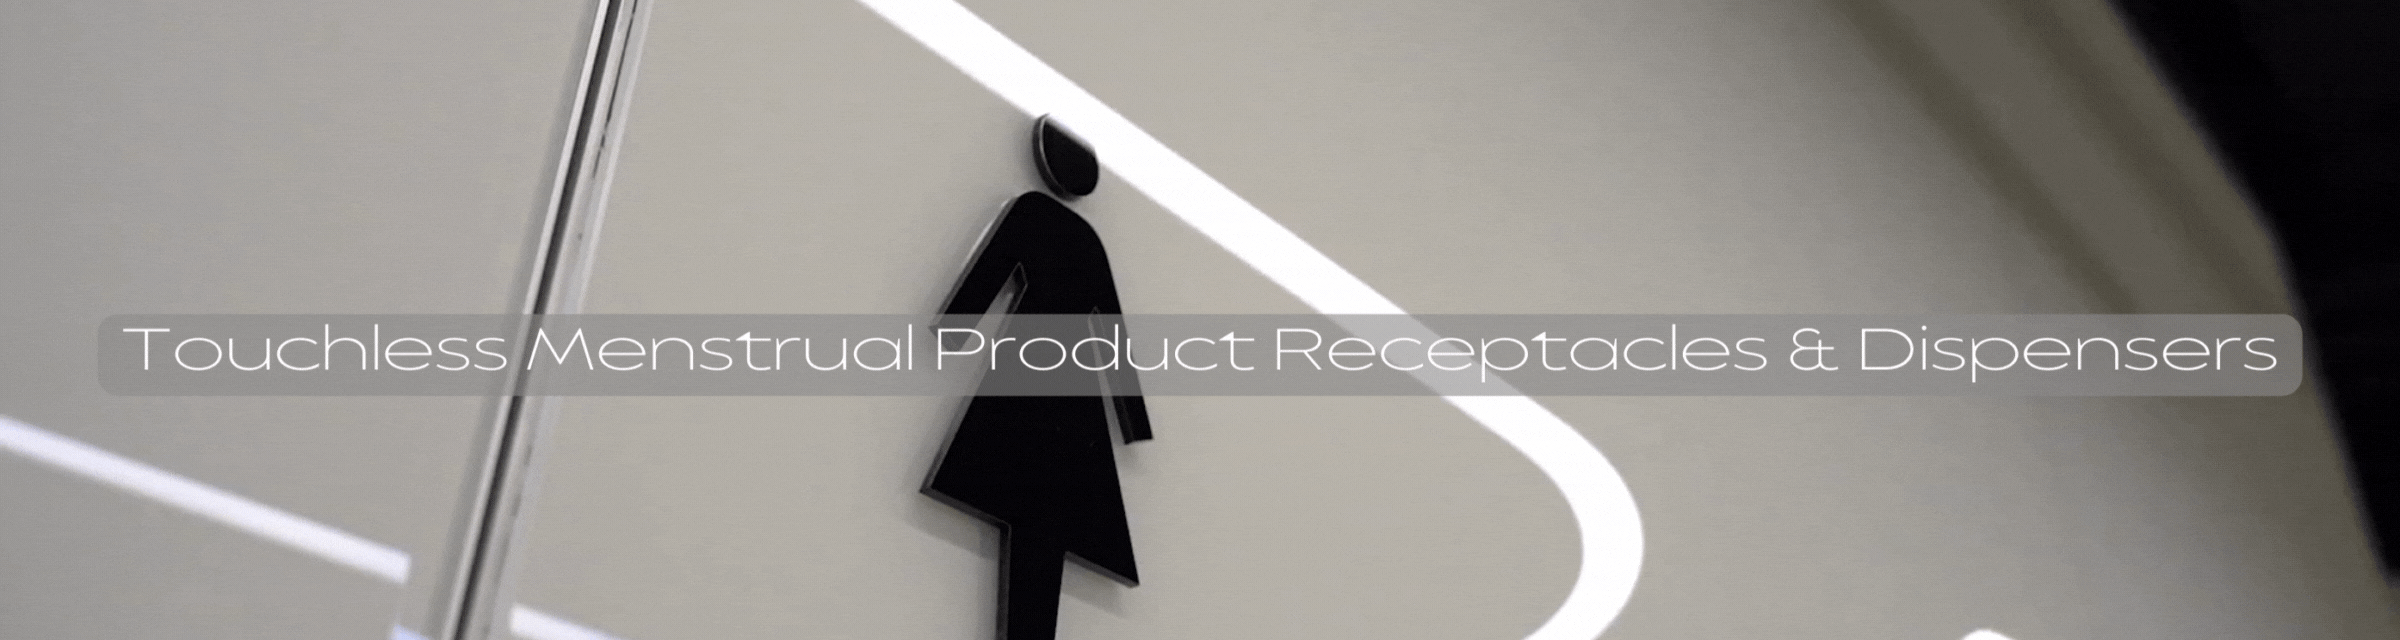 Touchless Menstrual Product Receptacles & Dispensers Banner